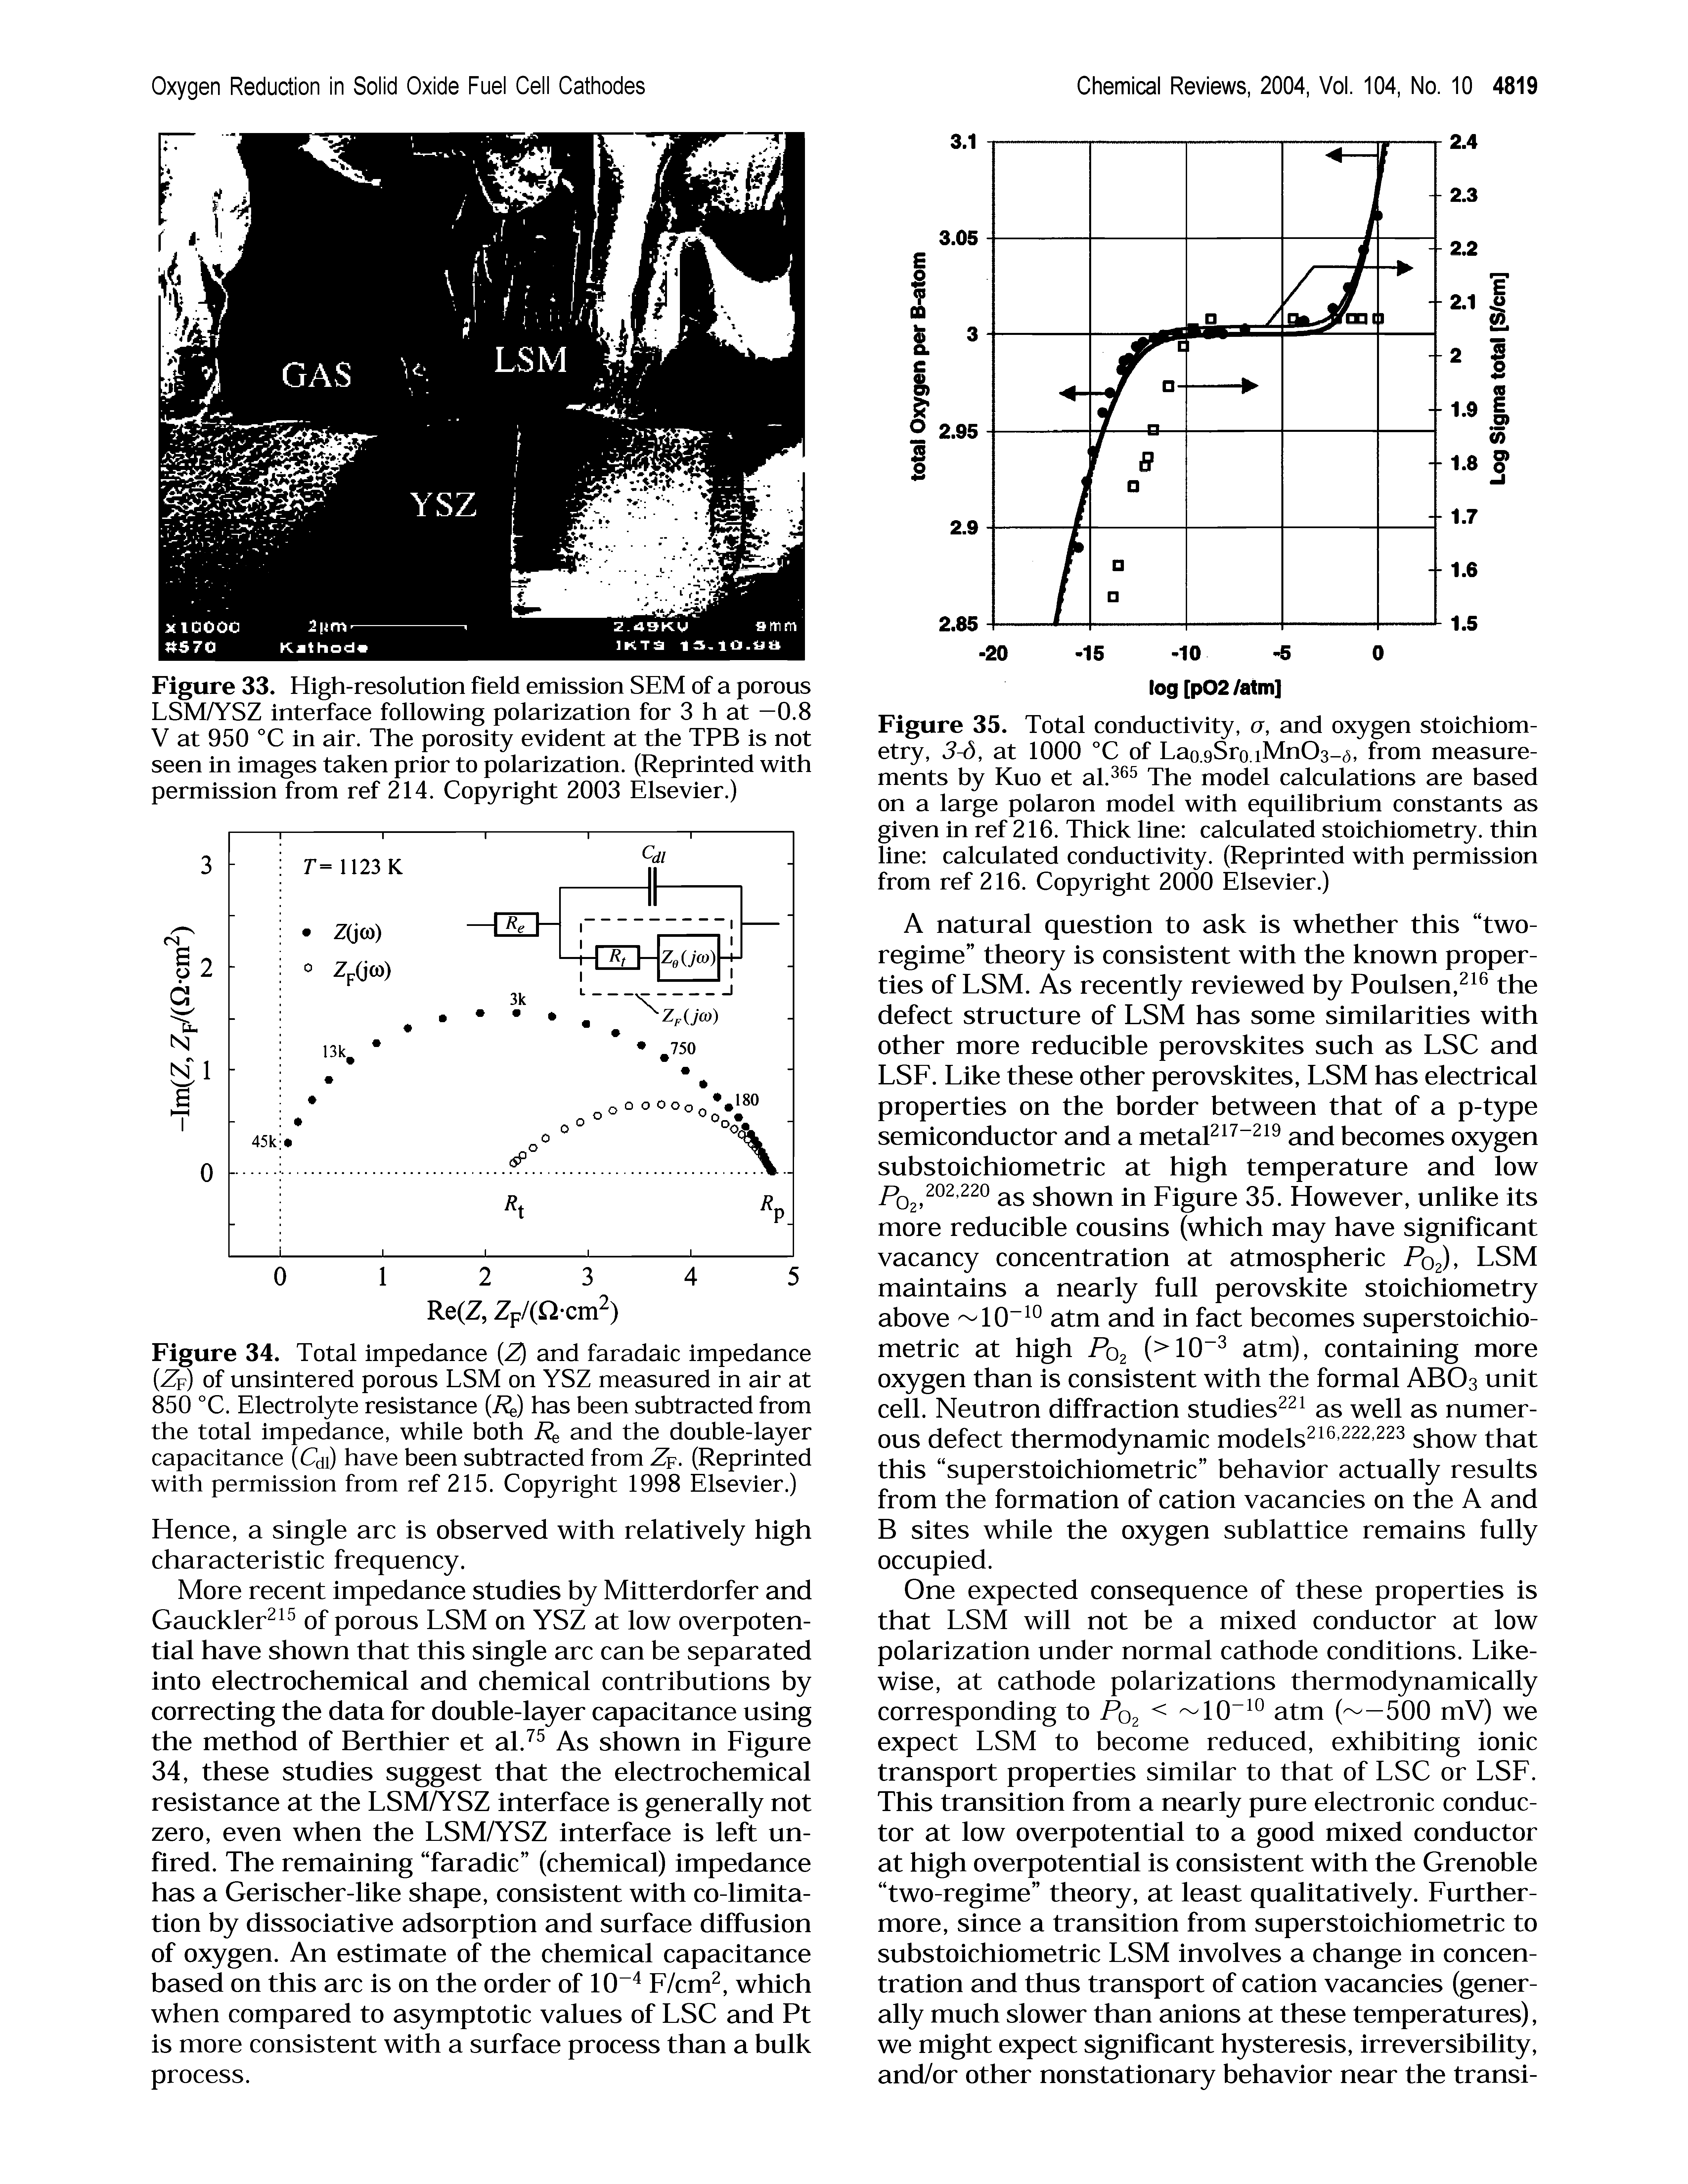 Figure 33. High-resolution field emission SEM of a porous LSM/YSZ interface following polarization for 3 h at —0.8 V at 950 °C in air. The porosity evident at the TPB is not seen in images taken prior to polarization. (Reprinted with permission from ref 214. Copyright 2003 Elsevier.)...